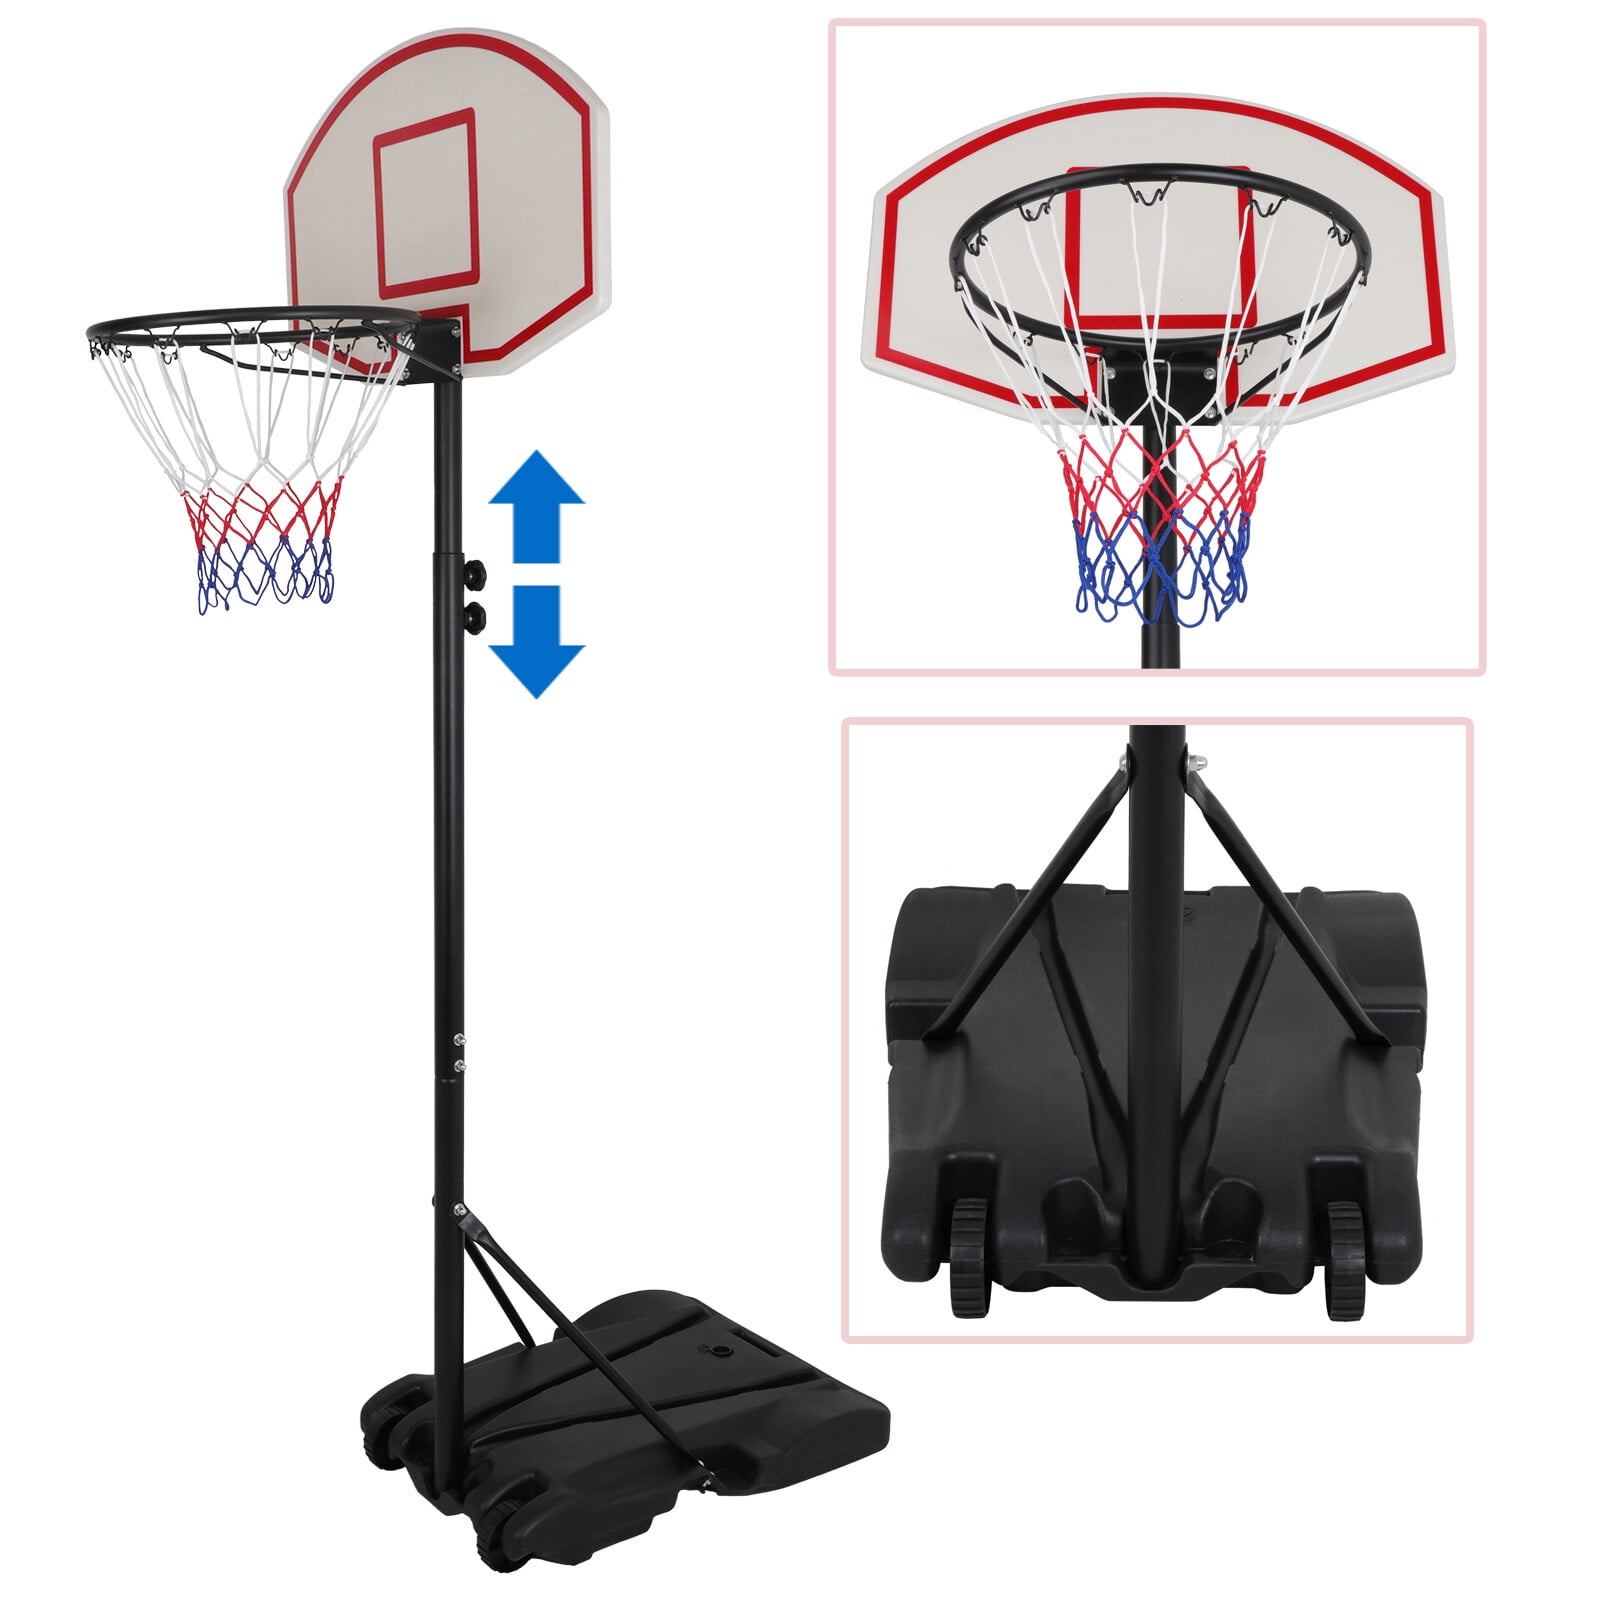 Details about   7 In 1 Height-Adjustable Basketball Hoop System Basketball Stand Artboards Kid A 